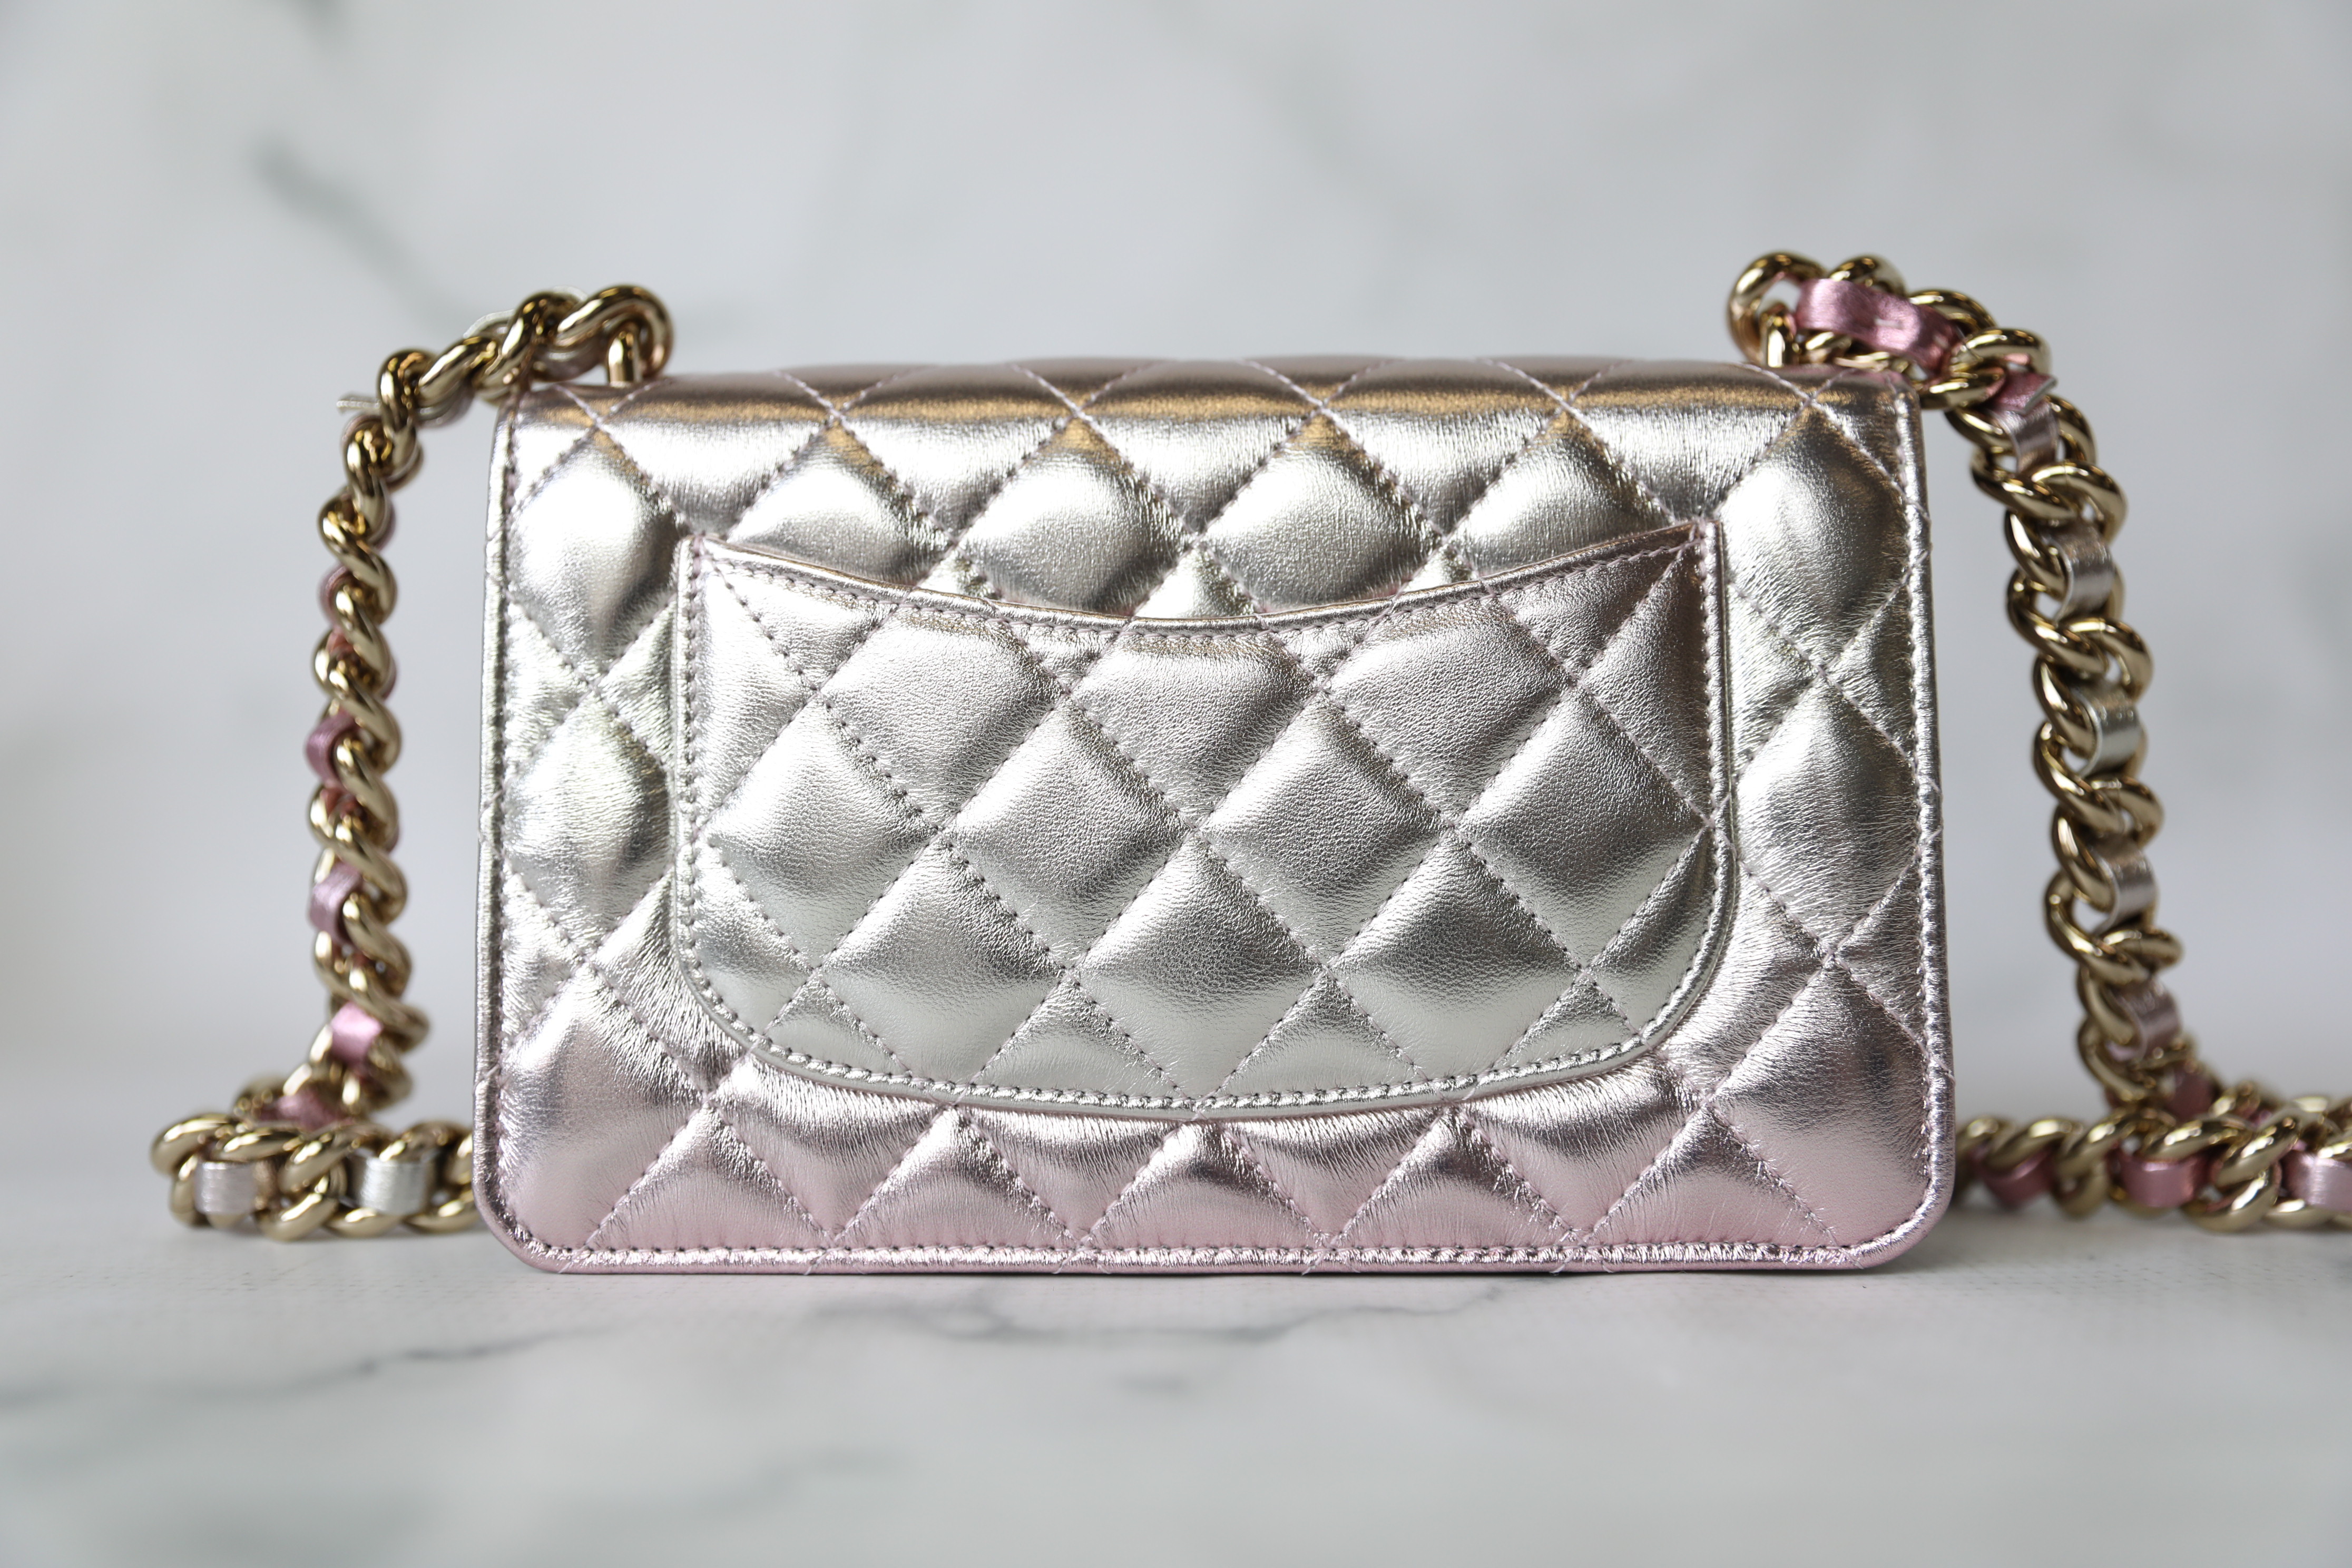 Wallet on chain - Shiny grained calfskin, strass & gold-tone metal, white —  Fashion